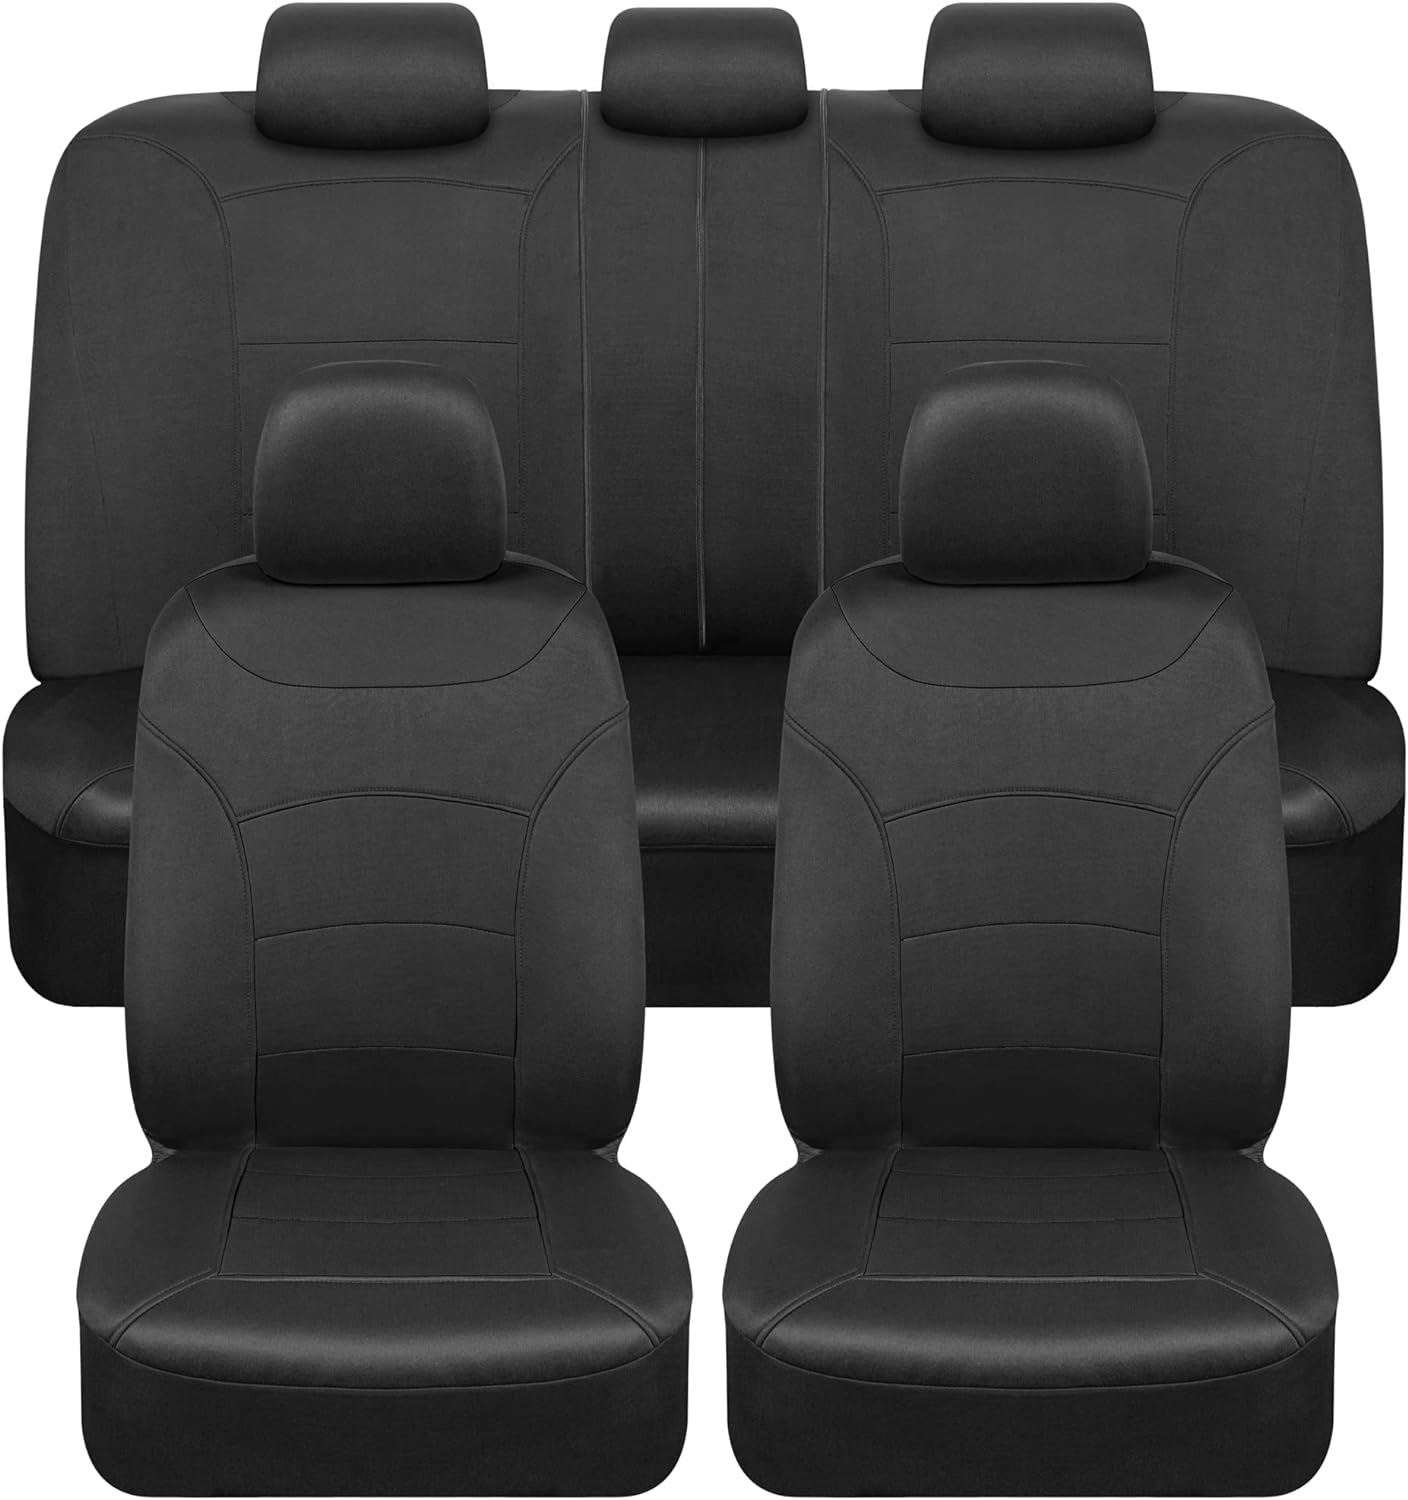 BDK carXS Turismo Car Seat Covers Full Set, Beige Two-Tone Front Seat Covers with Split Rear Bench Back Seat Cover, Automotive Seat Covers for Trucks SUV Van Auto (Multiple Colors)